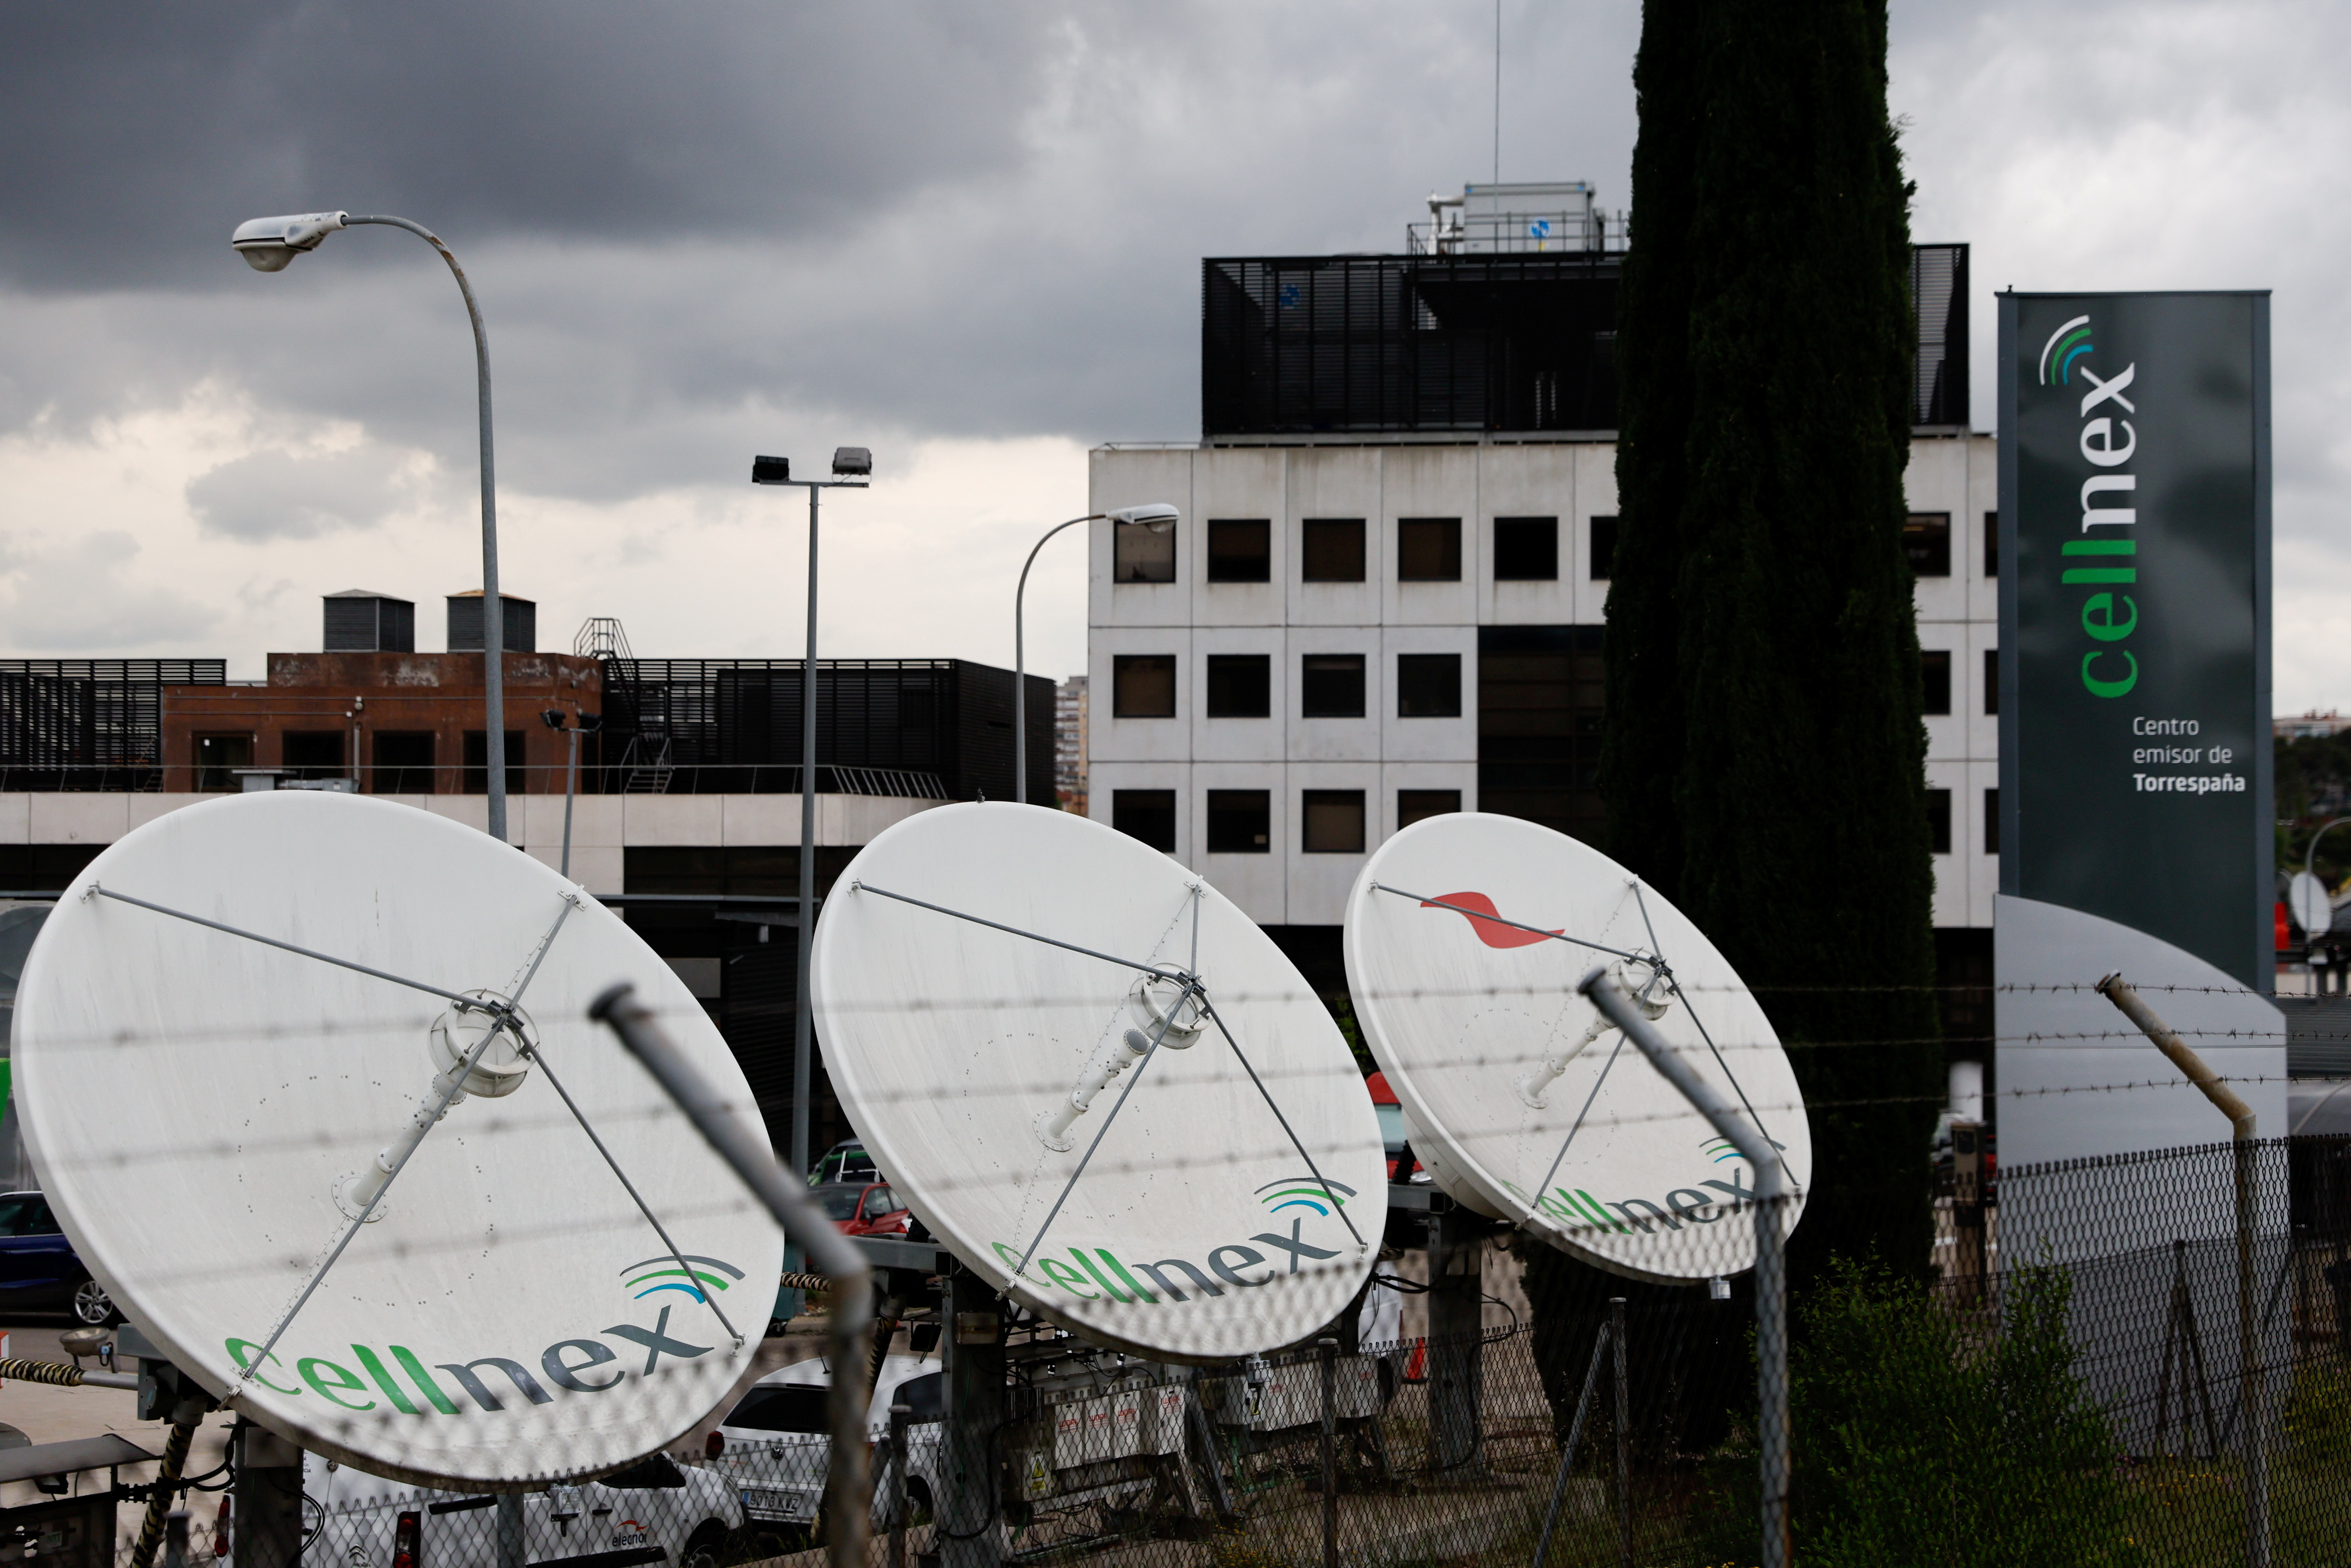 Telecom antennas of Spain’s telecom infrastructure company Cellnex are seen in Madrid